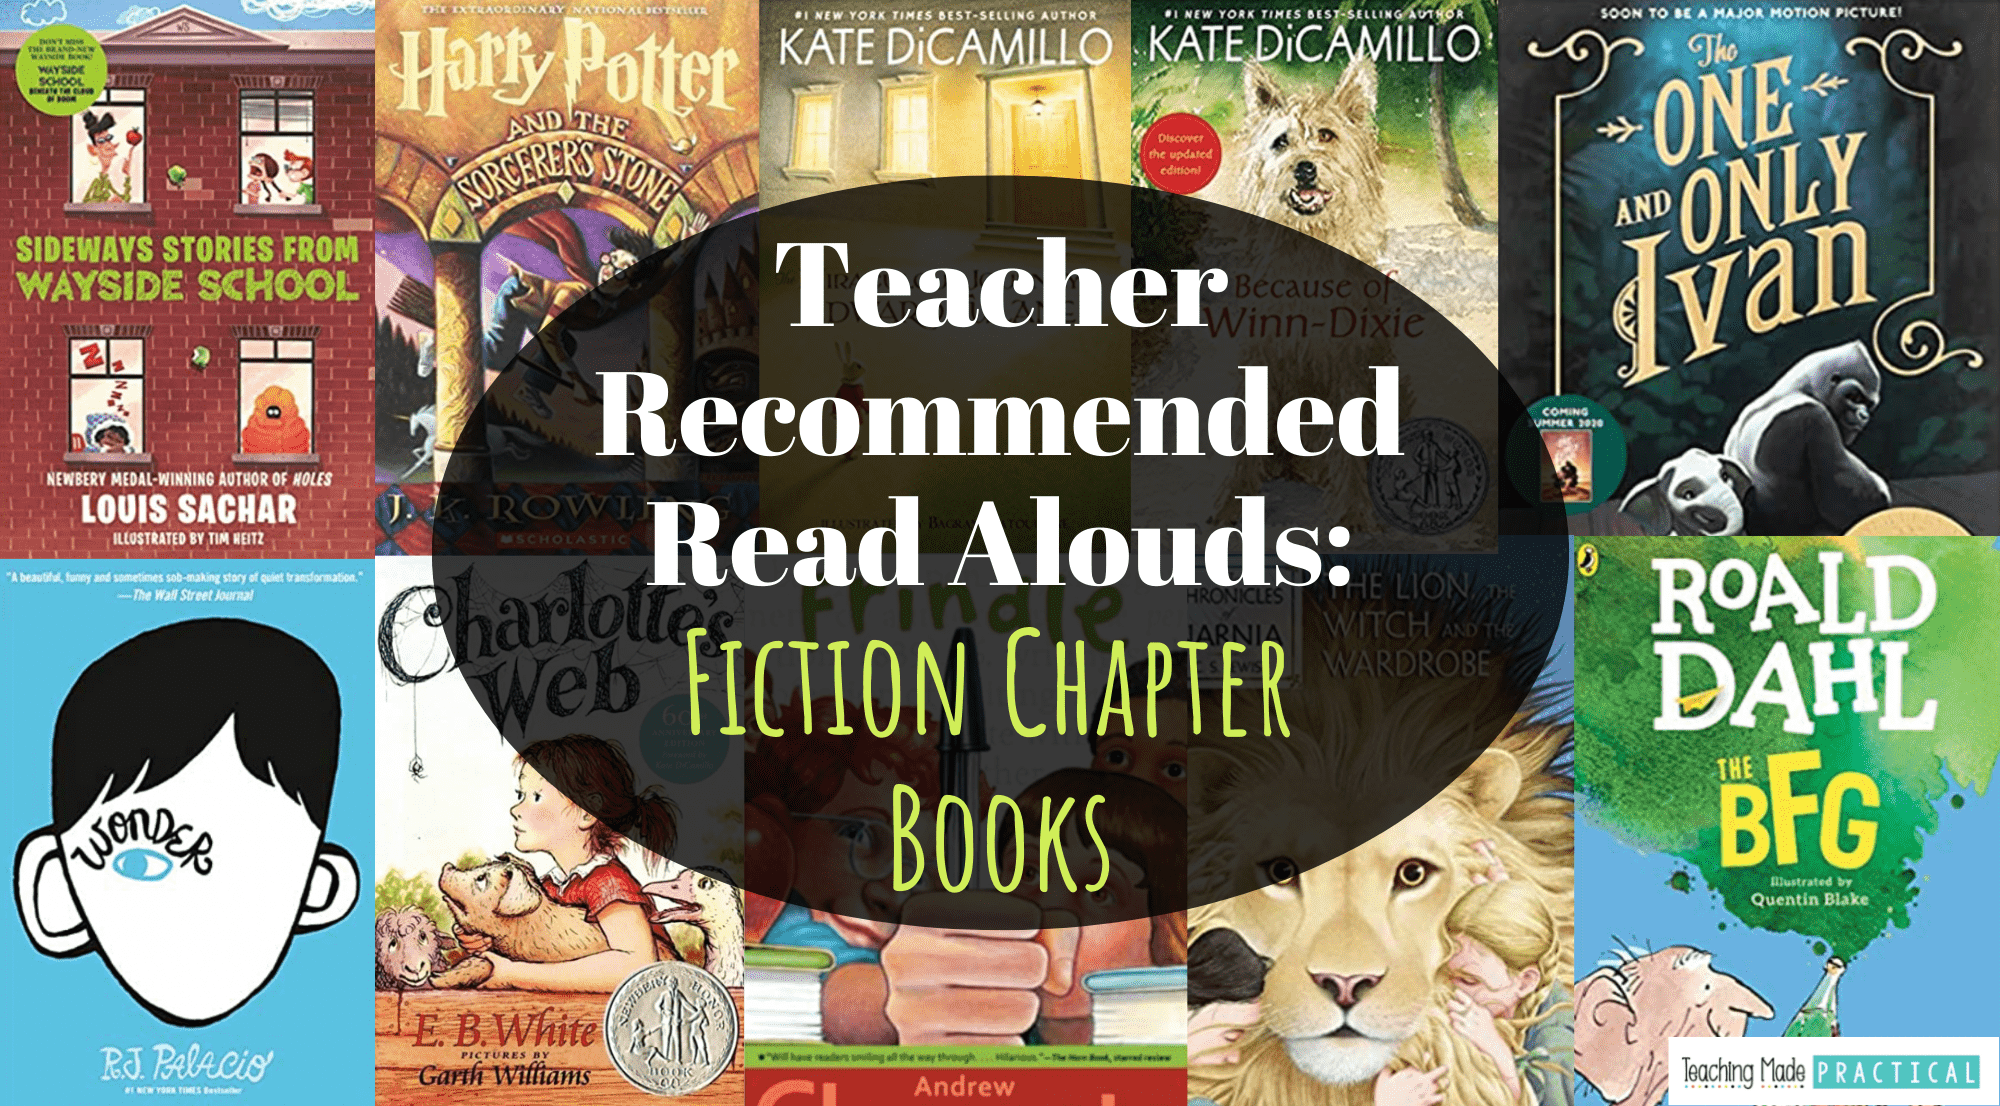 The best fiction chapter book read alouds for 3rd grade, 4th grade, and 5th grade students